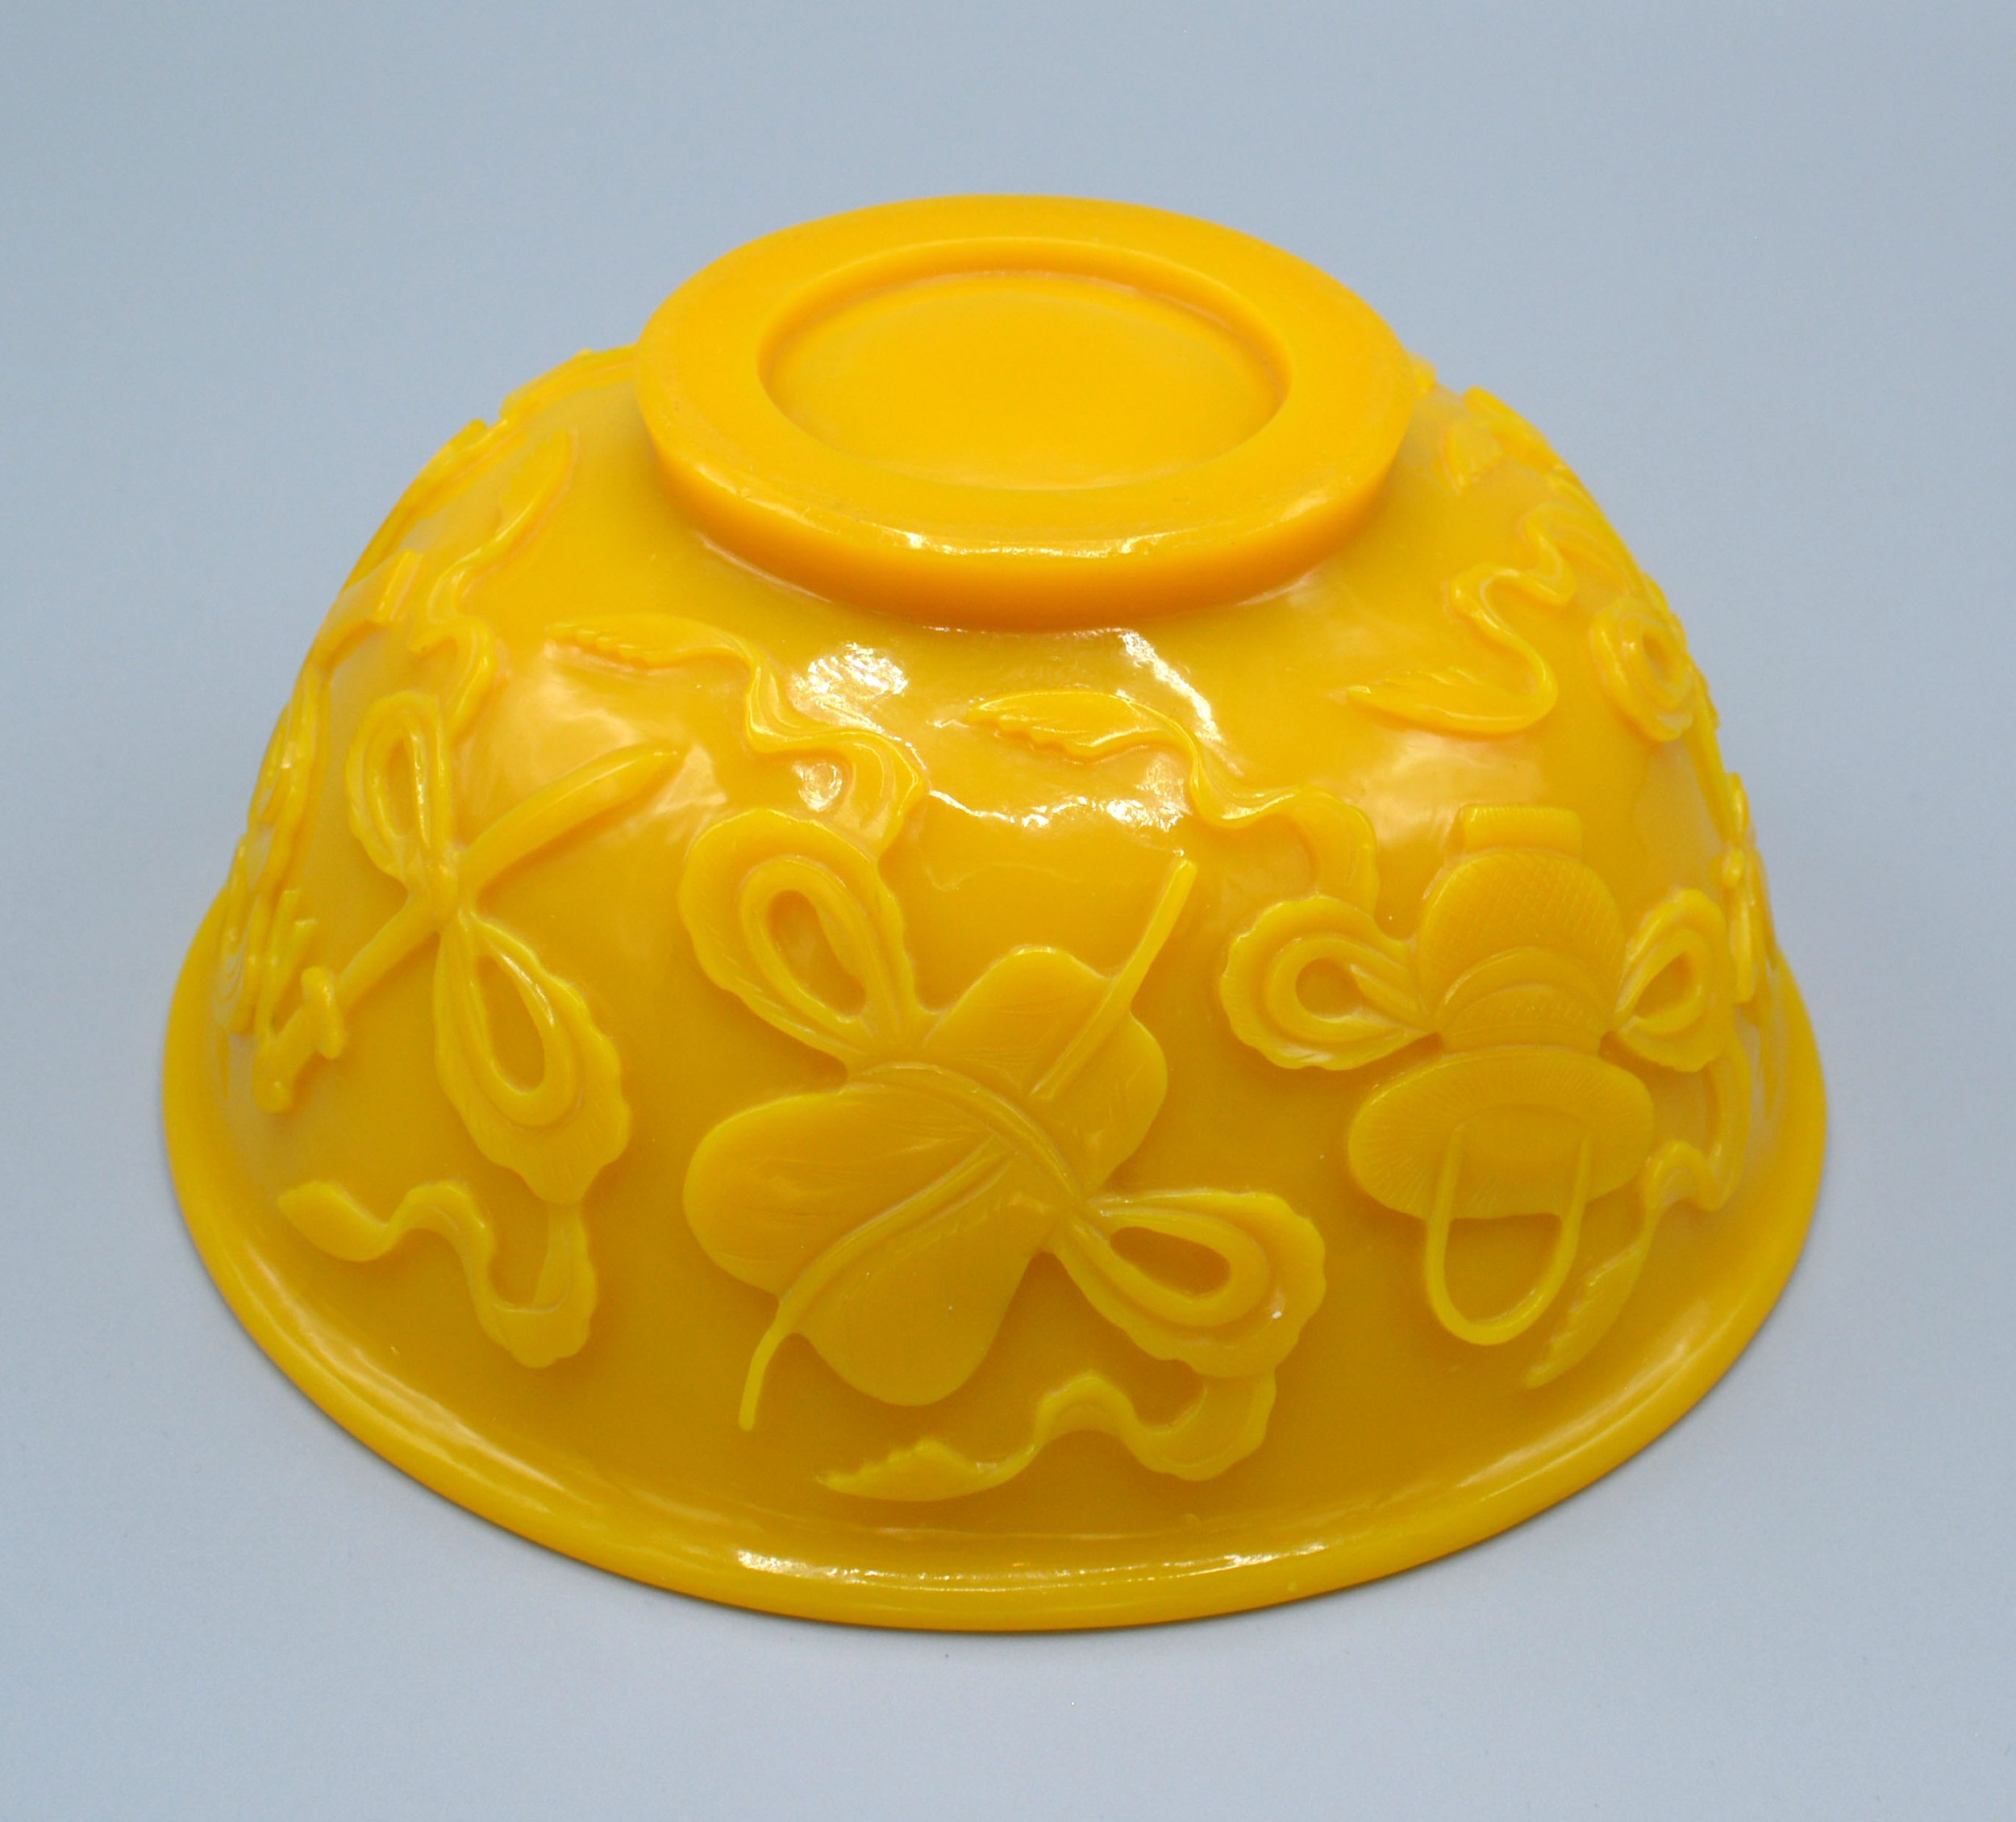 A Chinese Yellow Glass Bowl carved in relief with implements and scrolls, 15.5 cms diameter - Image 2 of 3